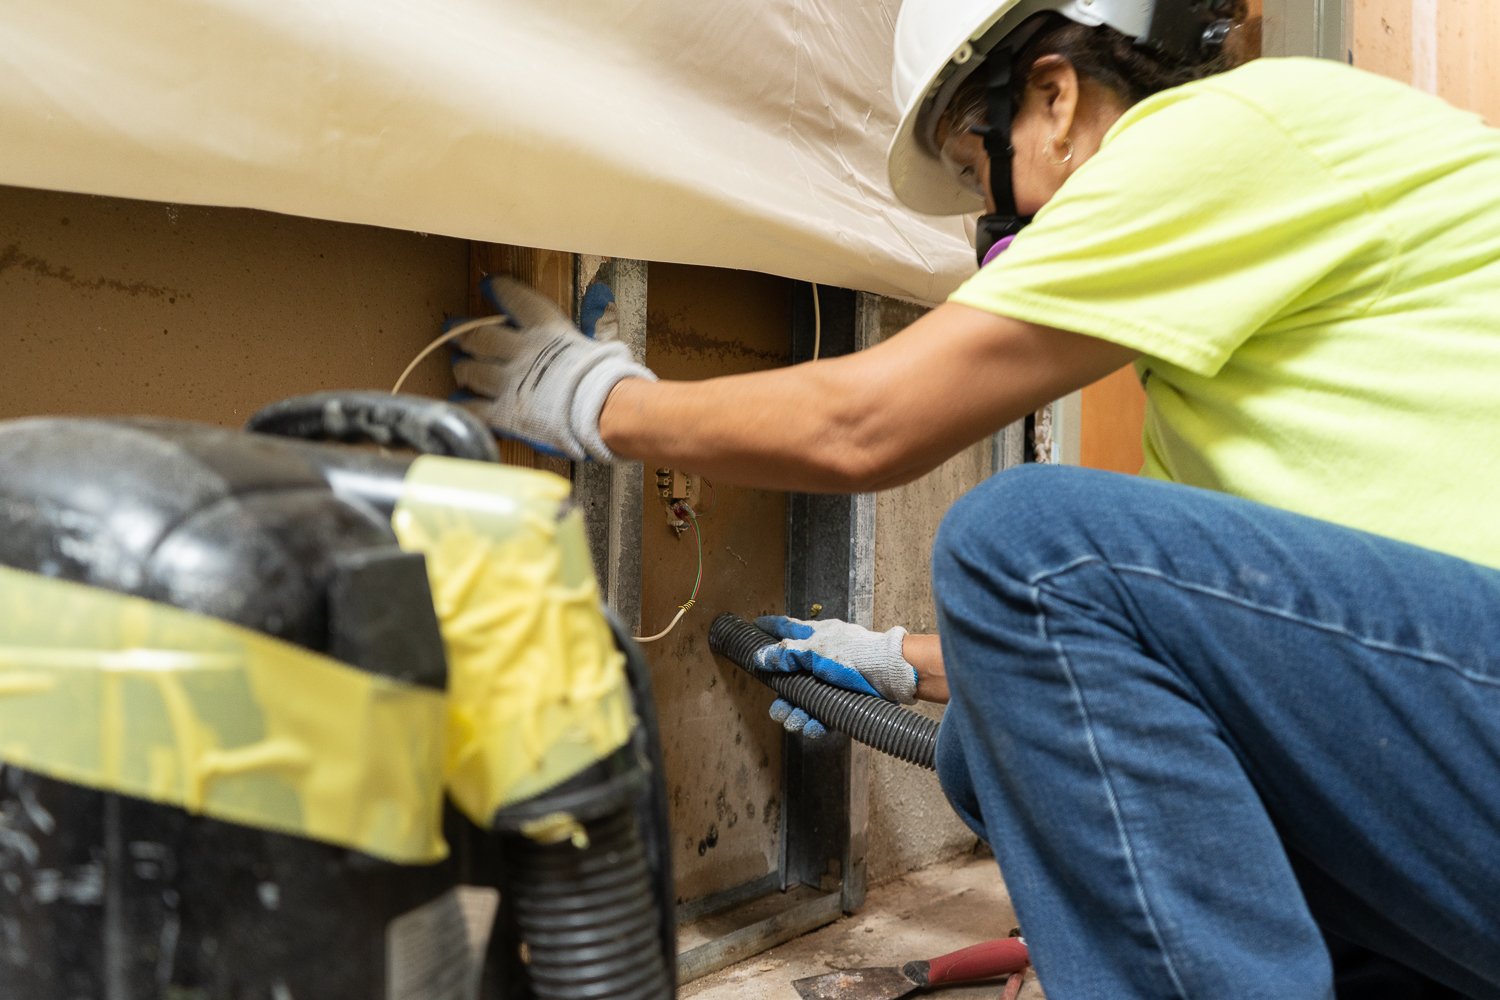 A worker uses a HEPA filtered vacuum to remove dangerous mold